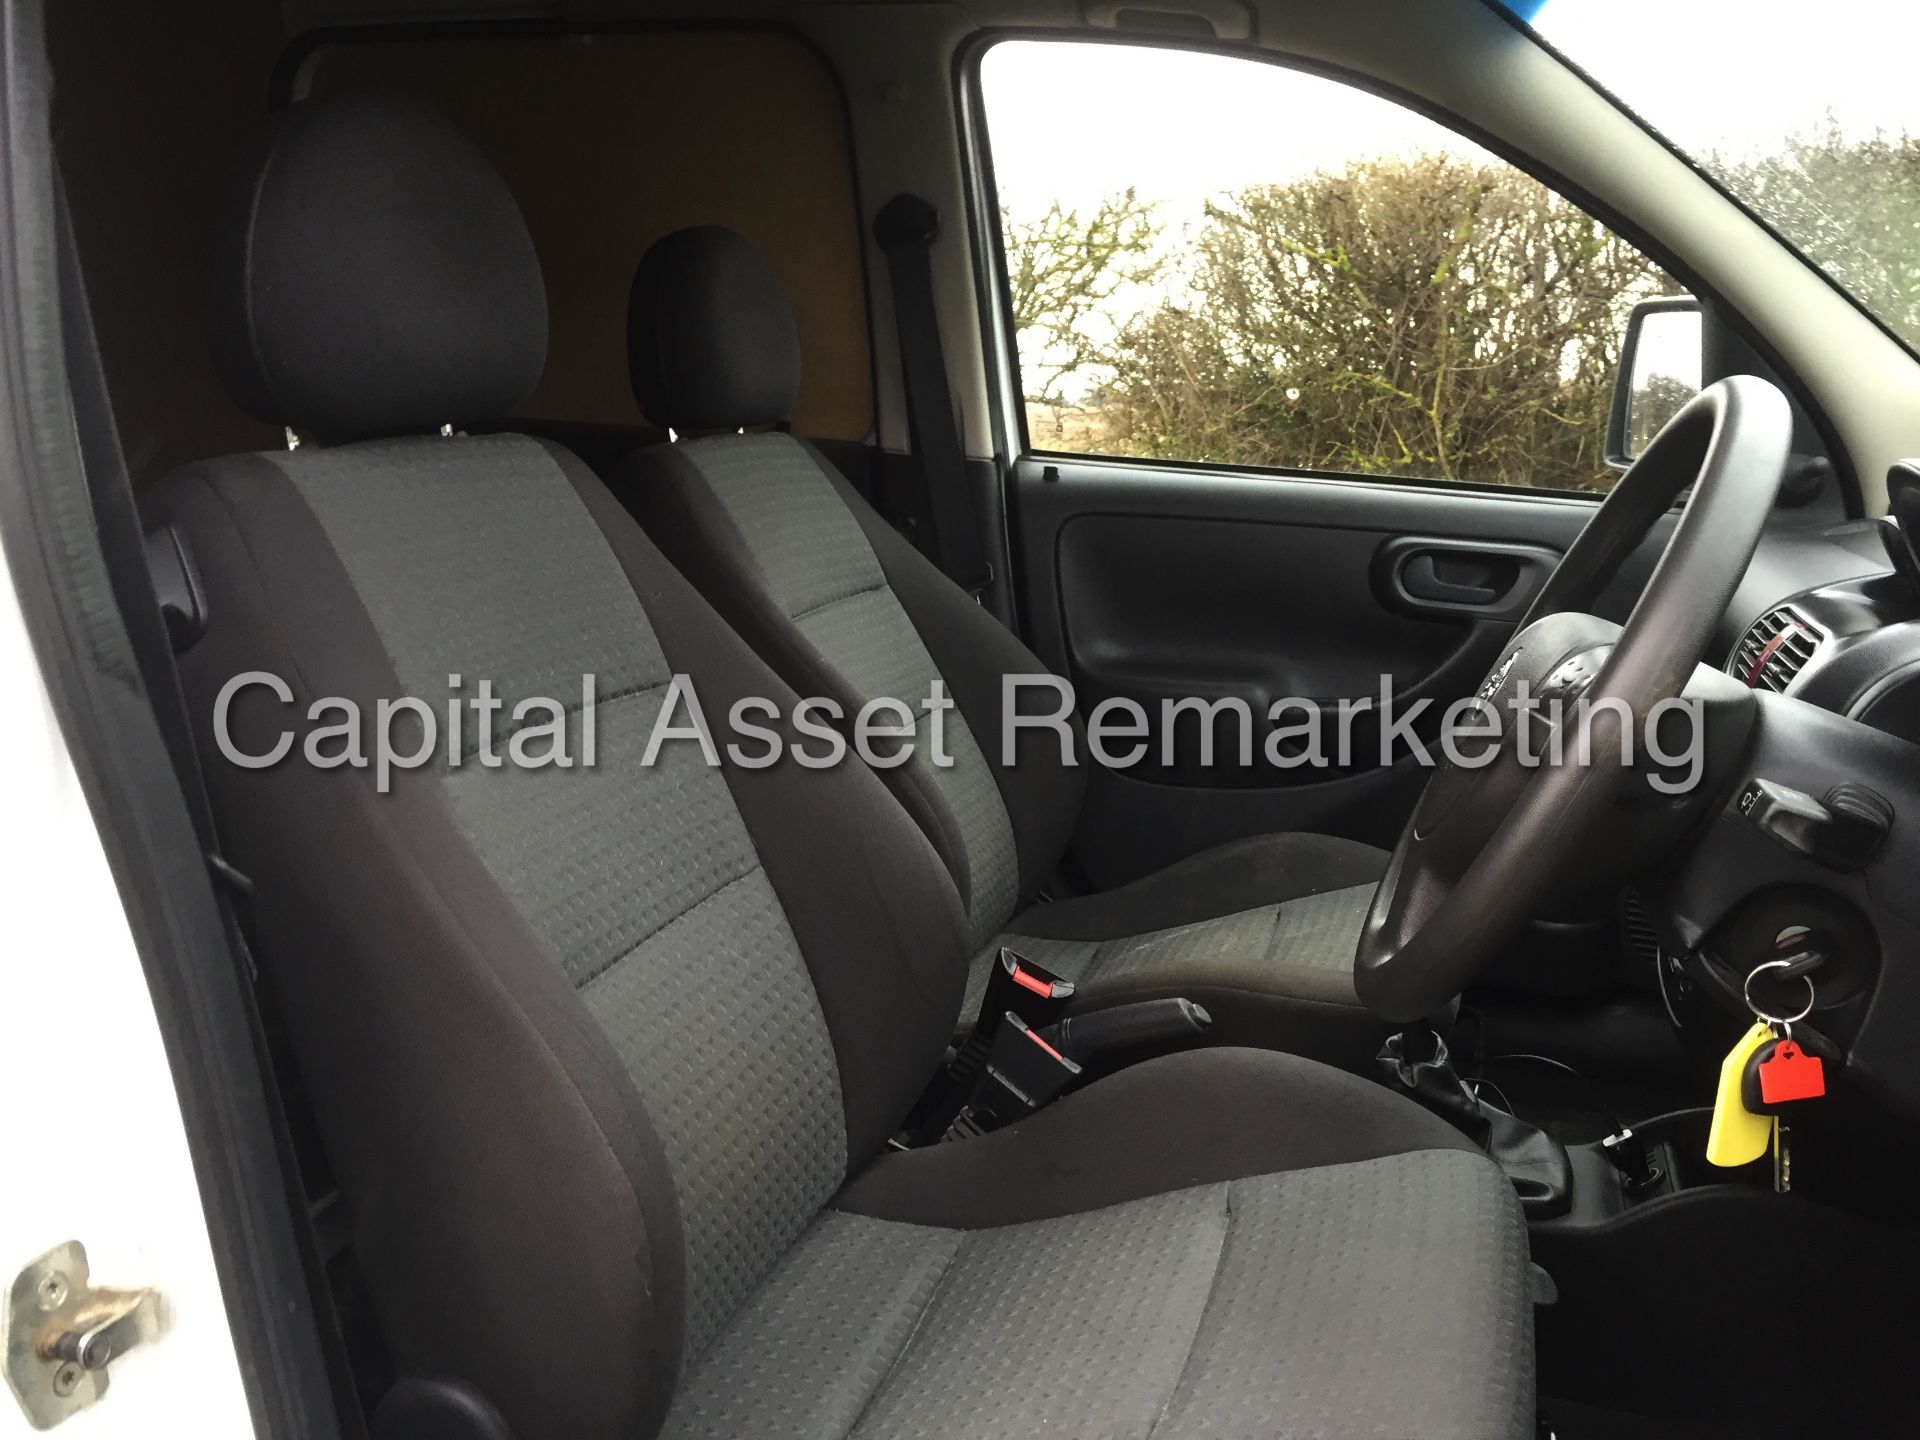 (ON SALE) VAUXHALL COMBO 1700 'SE' CDTI (2011 MODEL) 'DIESEL VAN' (1 OWNER FROM NEW) - Image 11 of 17